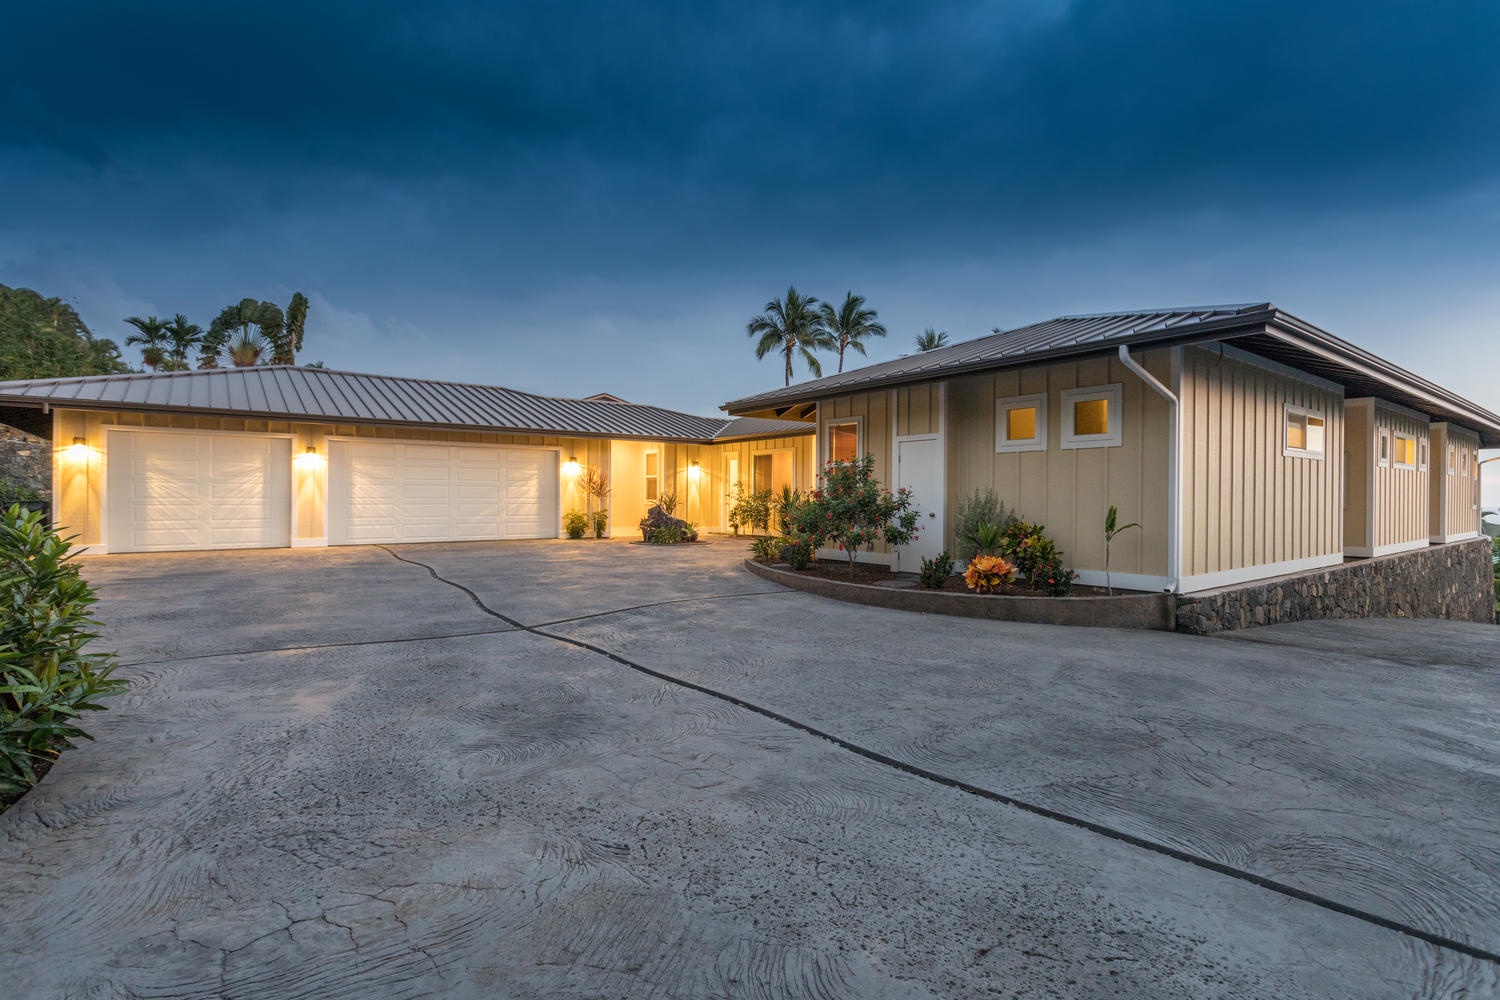 Kailua Kona Vacation Rentals, Ohana le'ale'a - The 3-car garage has been transformed into a Game Room, complete with a full-sized bar and large LED TV. Play a game of ping pong or pool after a long day of traveling, or watch the big game on the TV